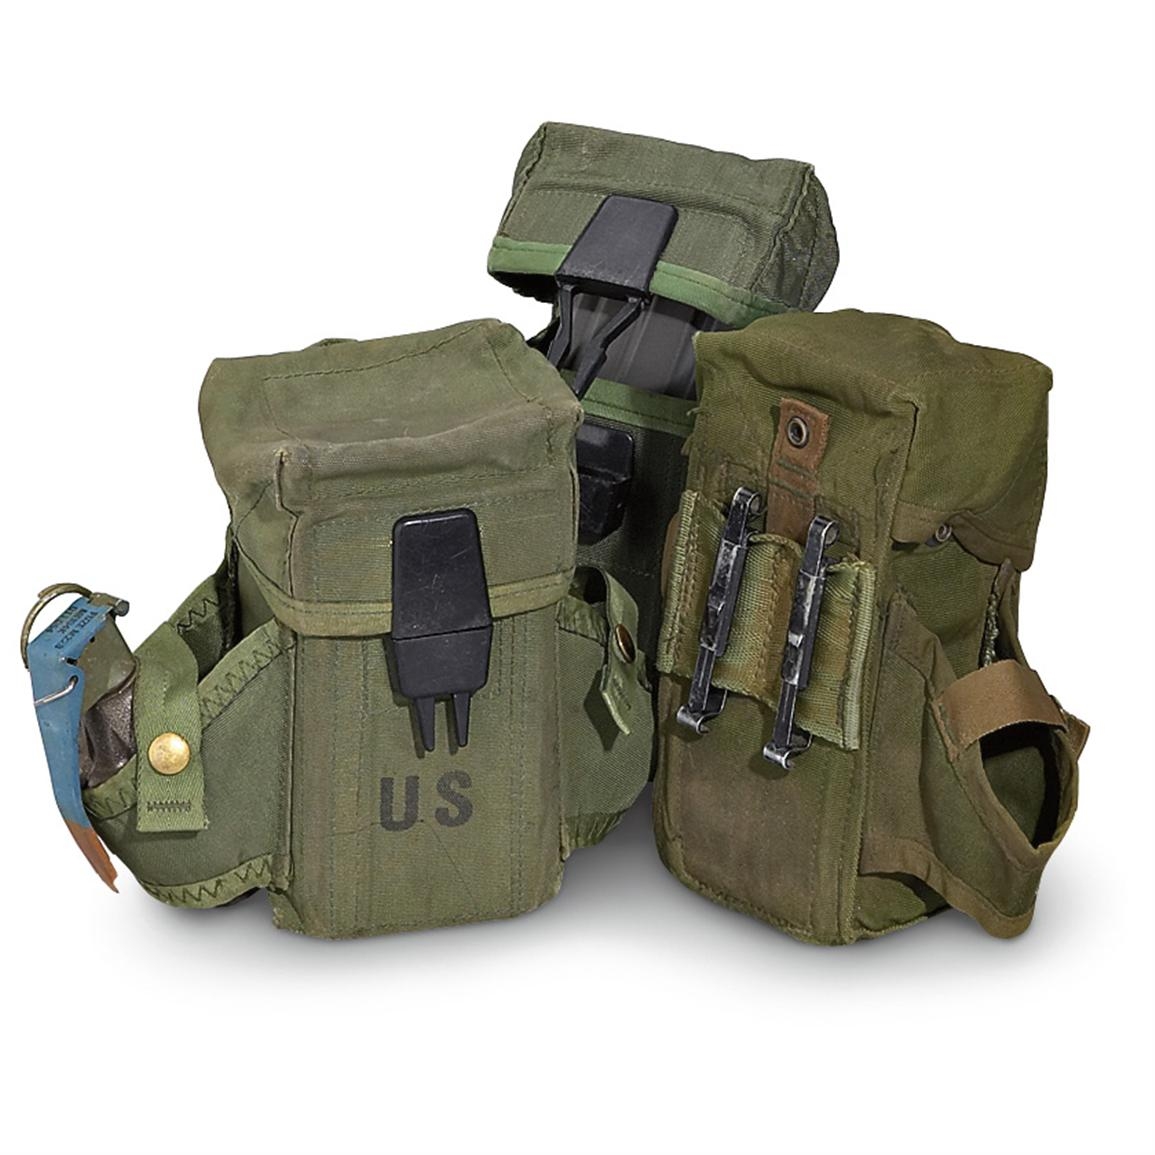 MILITARY SURPLUS Small Arms Ammunition Pouch M16.